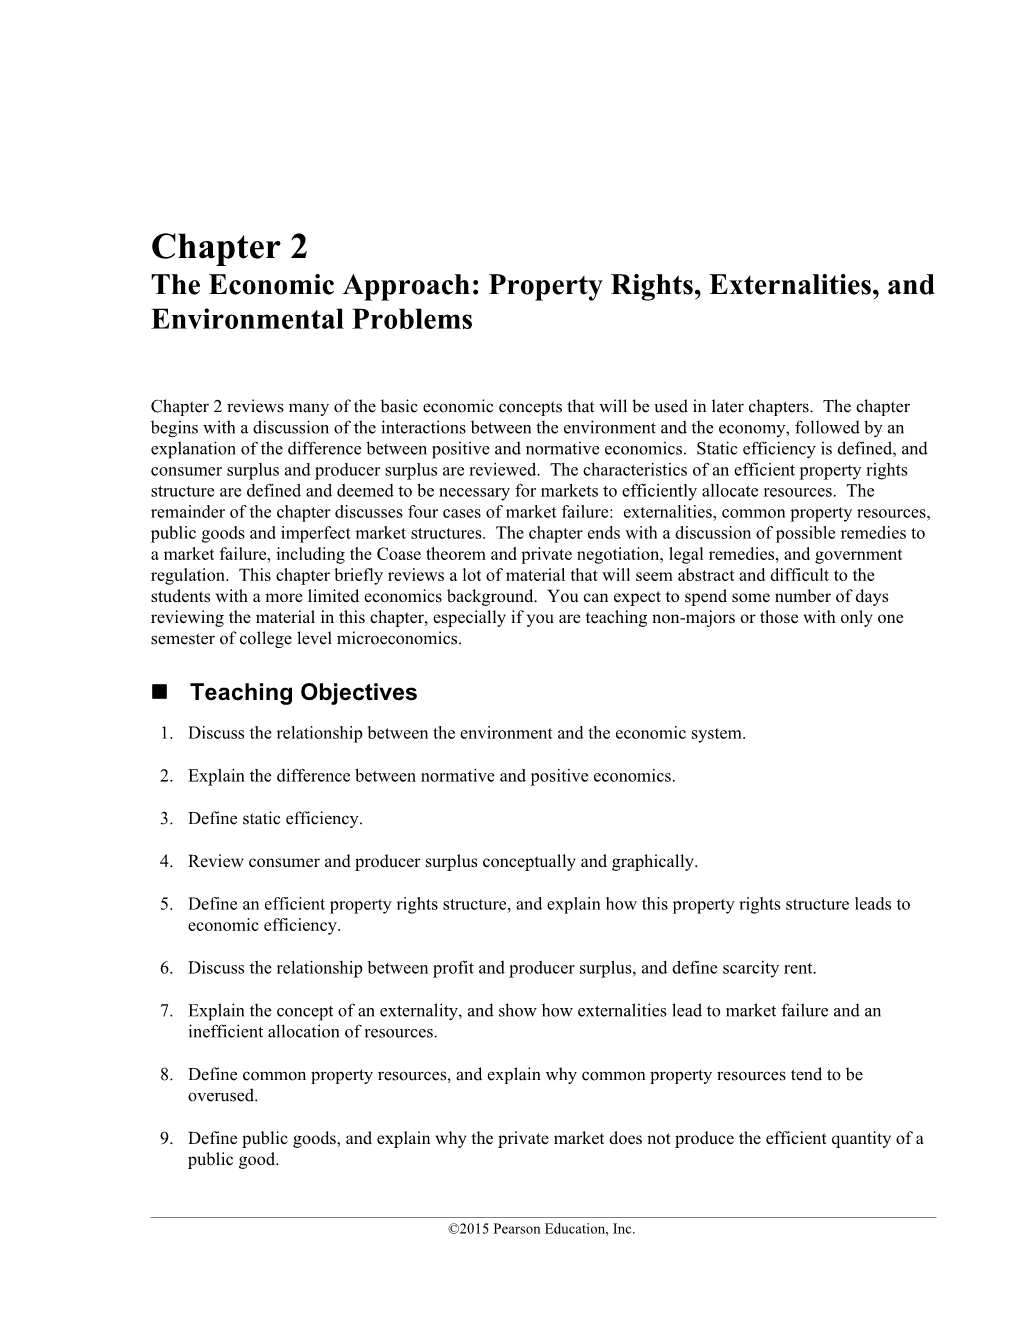 Chapter 2 the Economic Approach: Property Rights, Externalities, and Environmental Problems